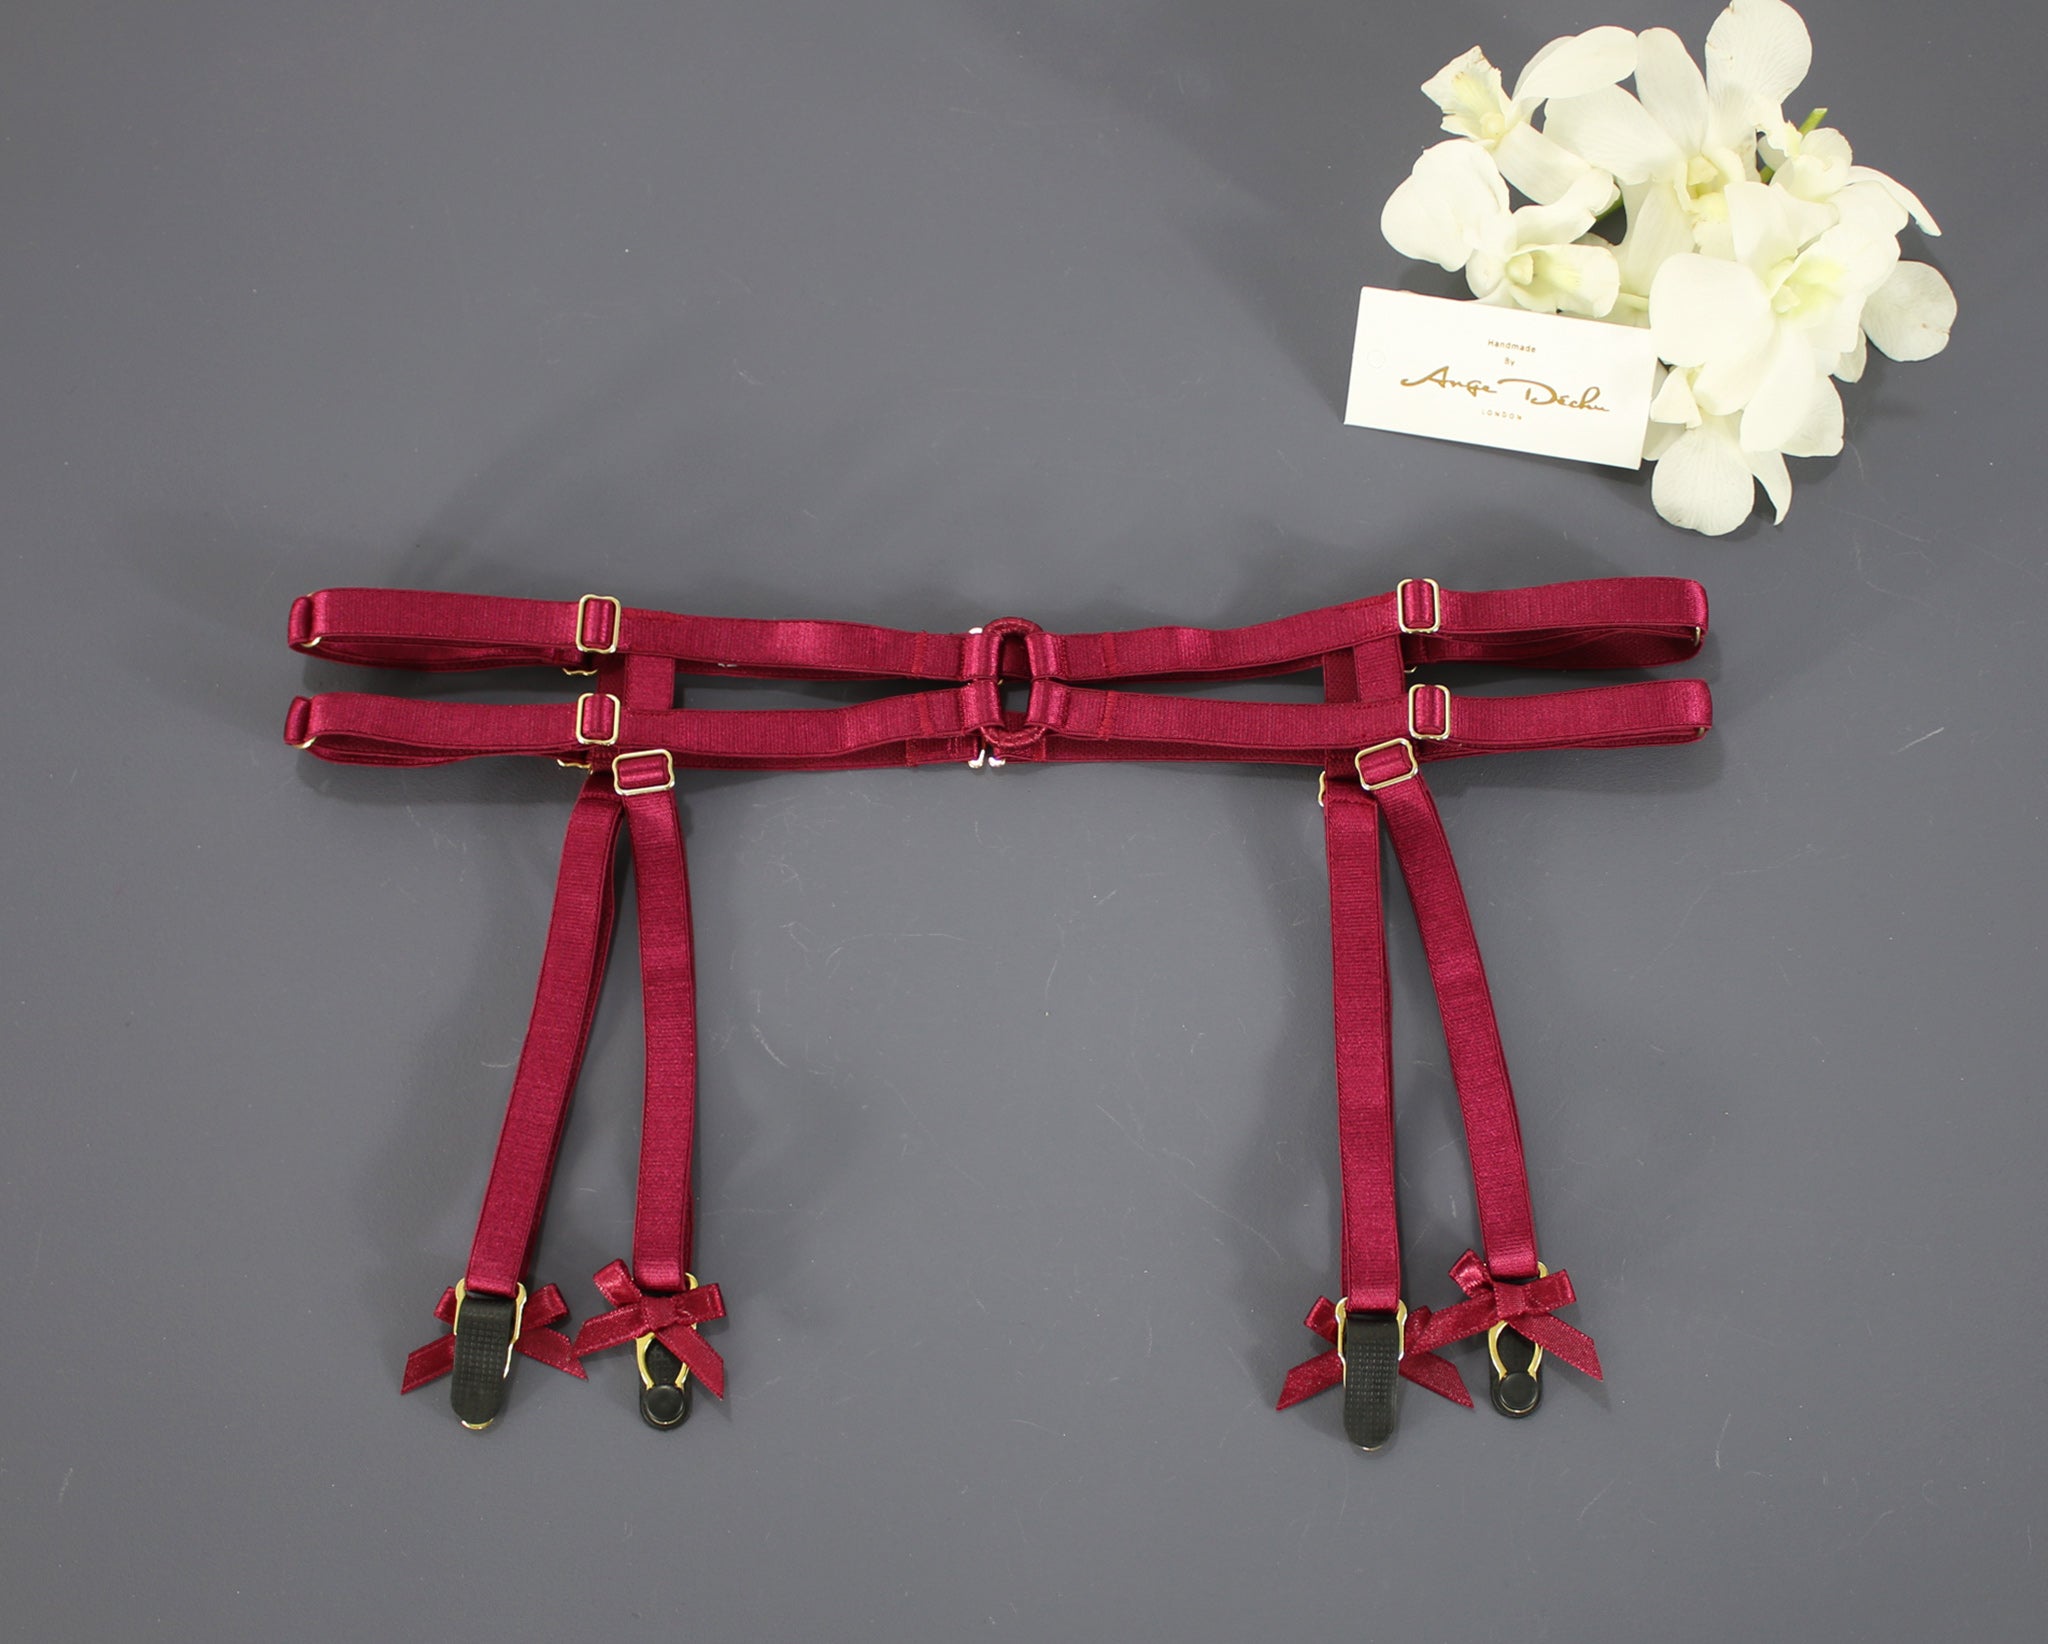 Body harness set in red with choker sexy garter belt harness garter and suspender boudoir gift for her - Ange Déchu